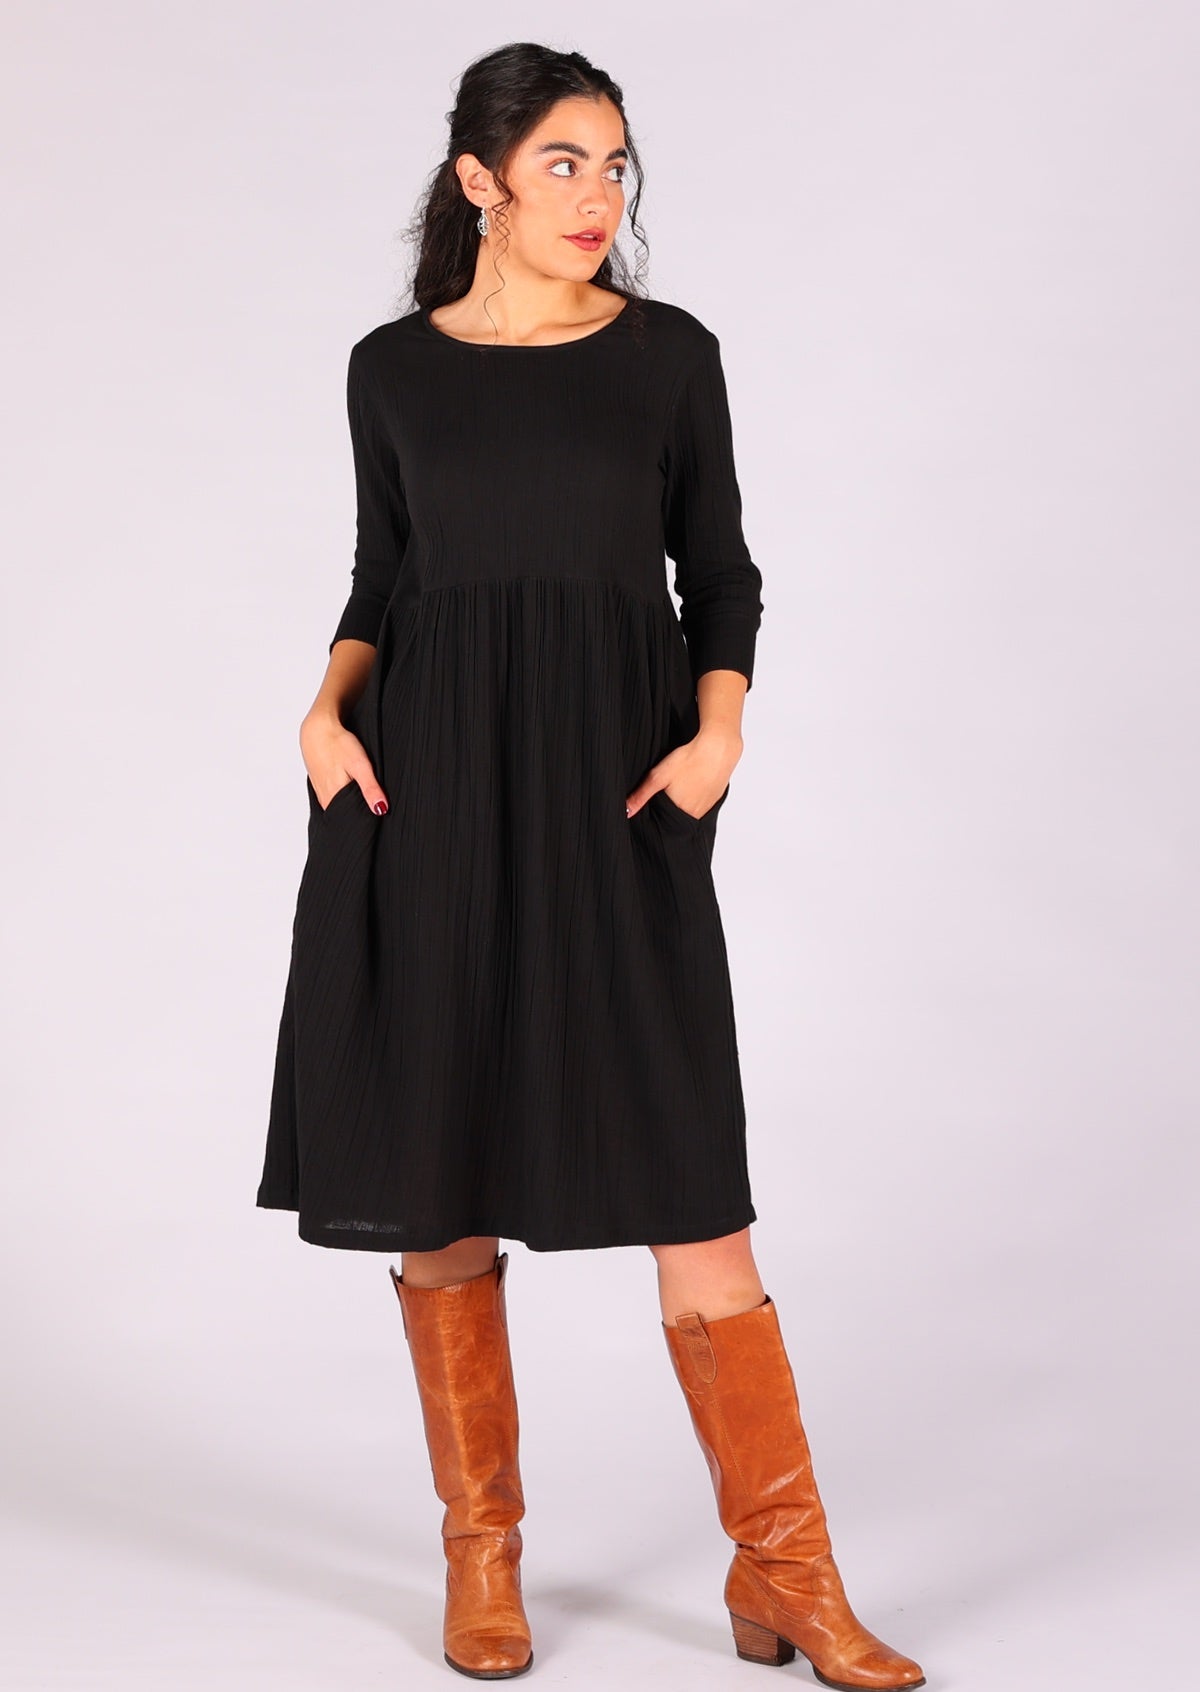 Double cotton black knee length dress with round neckline and hidden side pockets